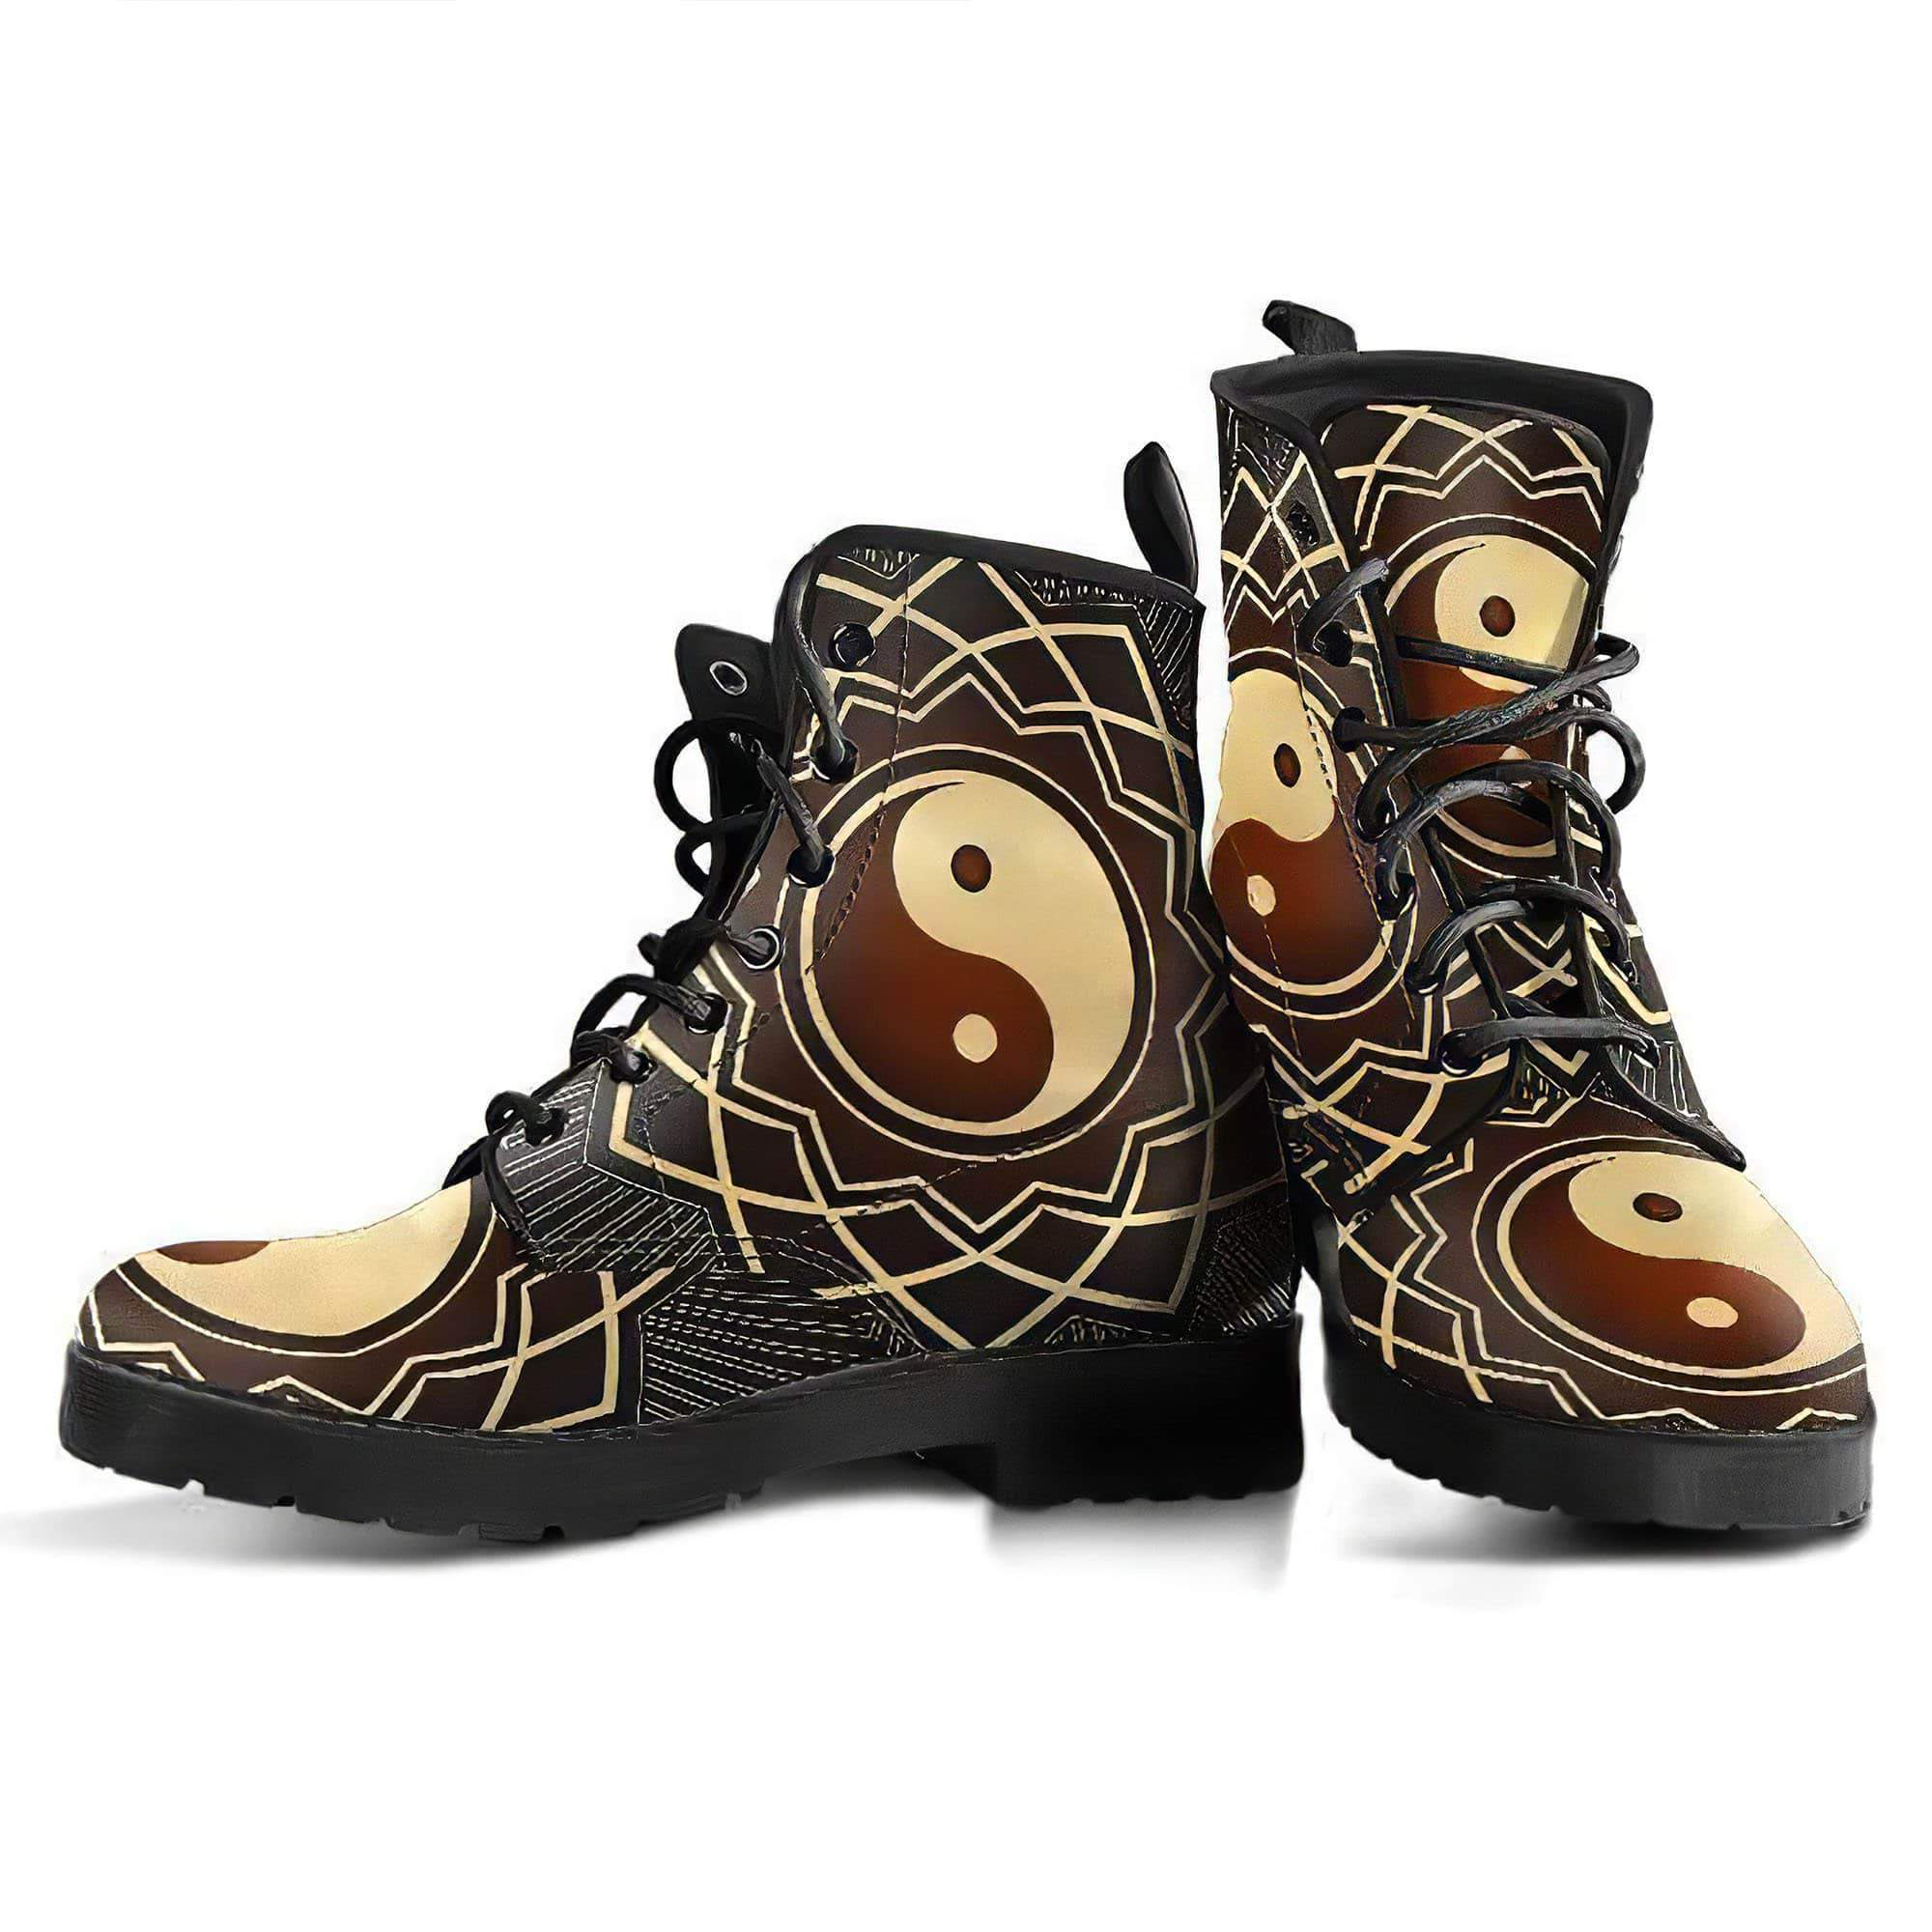 yinyang-mandala-5-handcrafted-boots-women-s-leather-boots-12051984416829.jpg